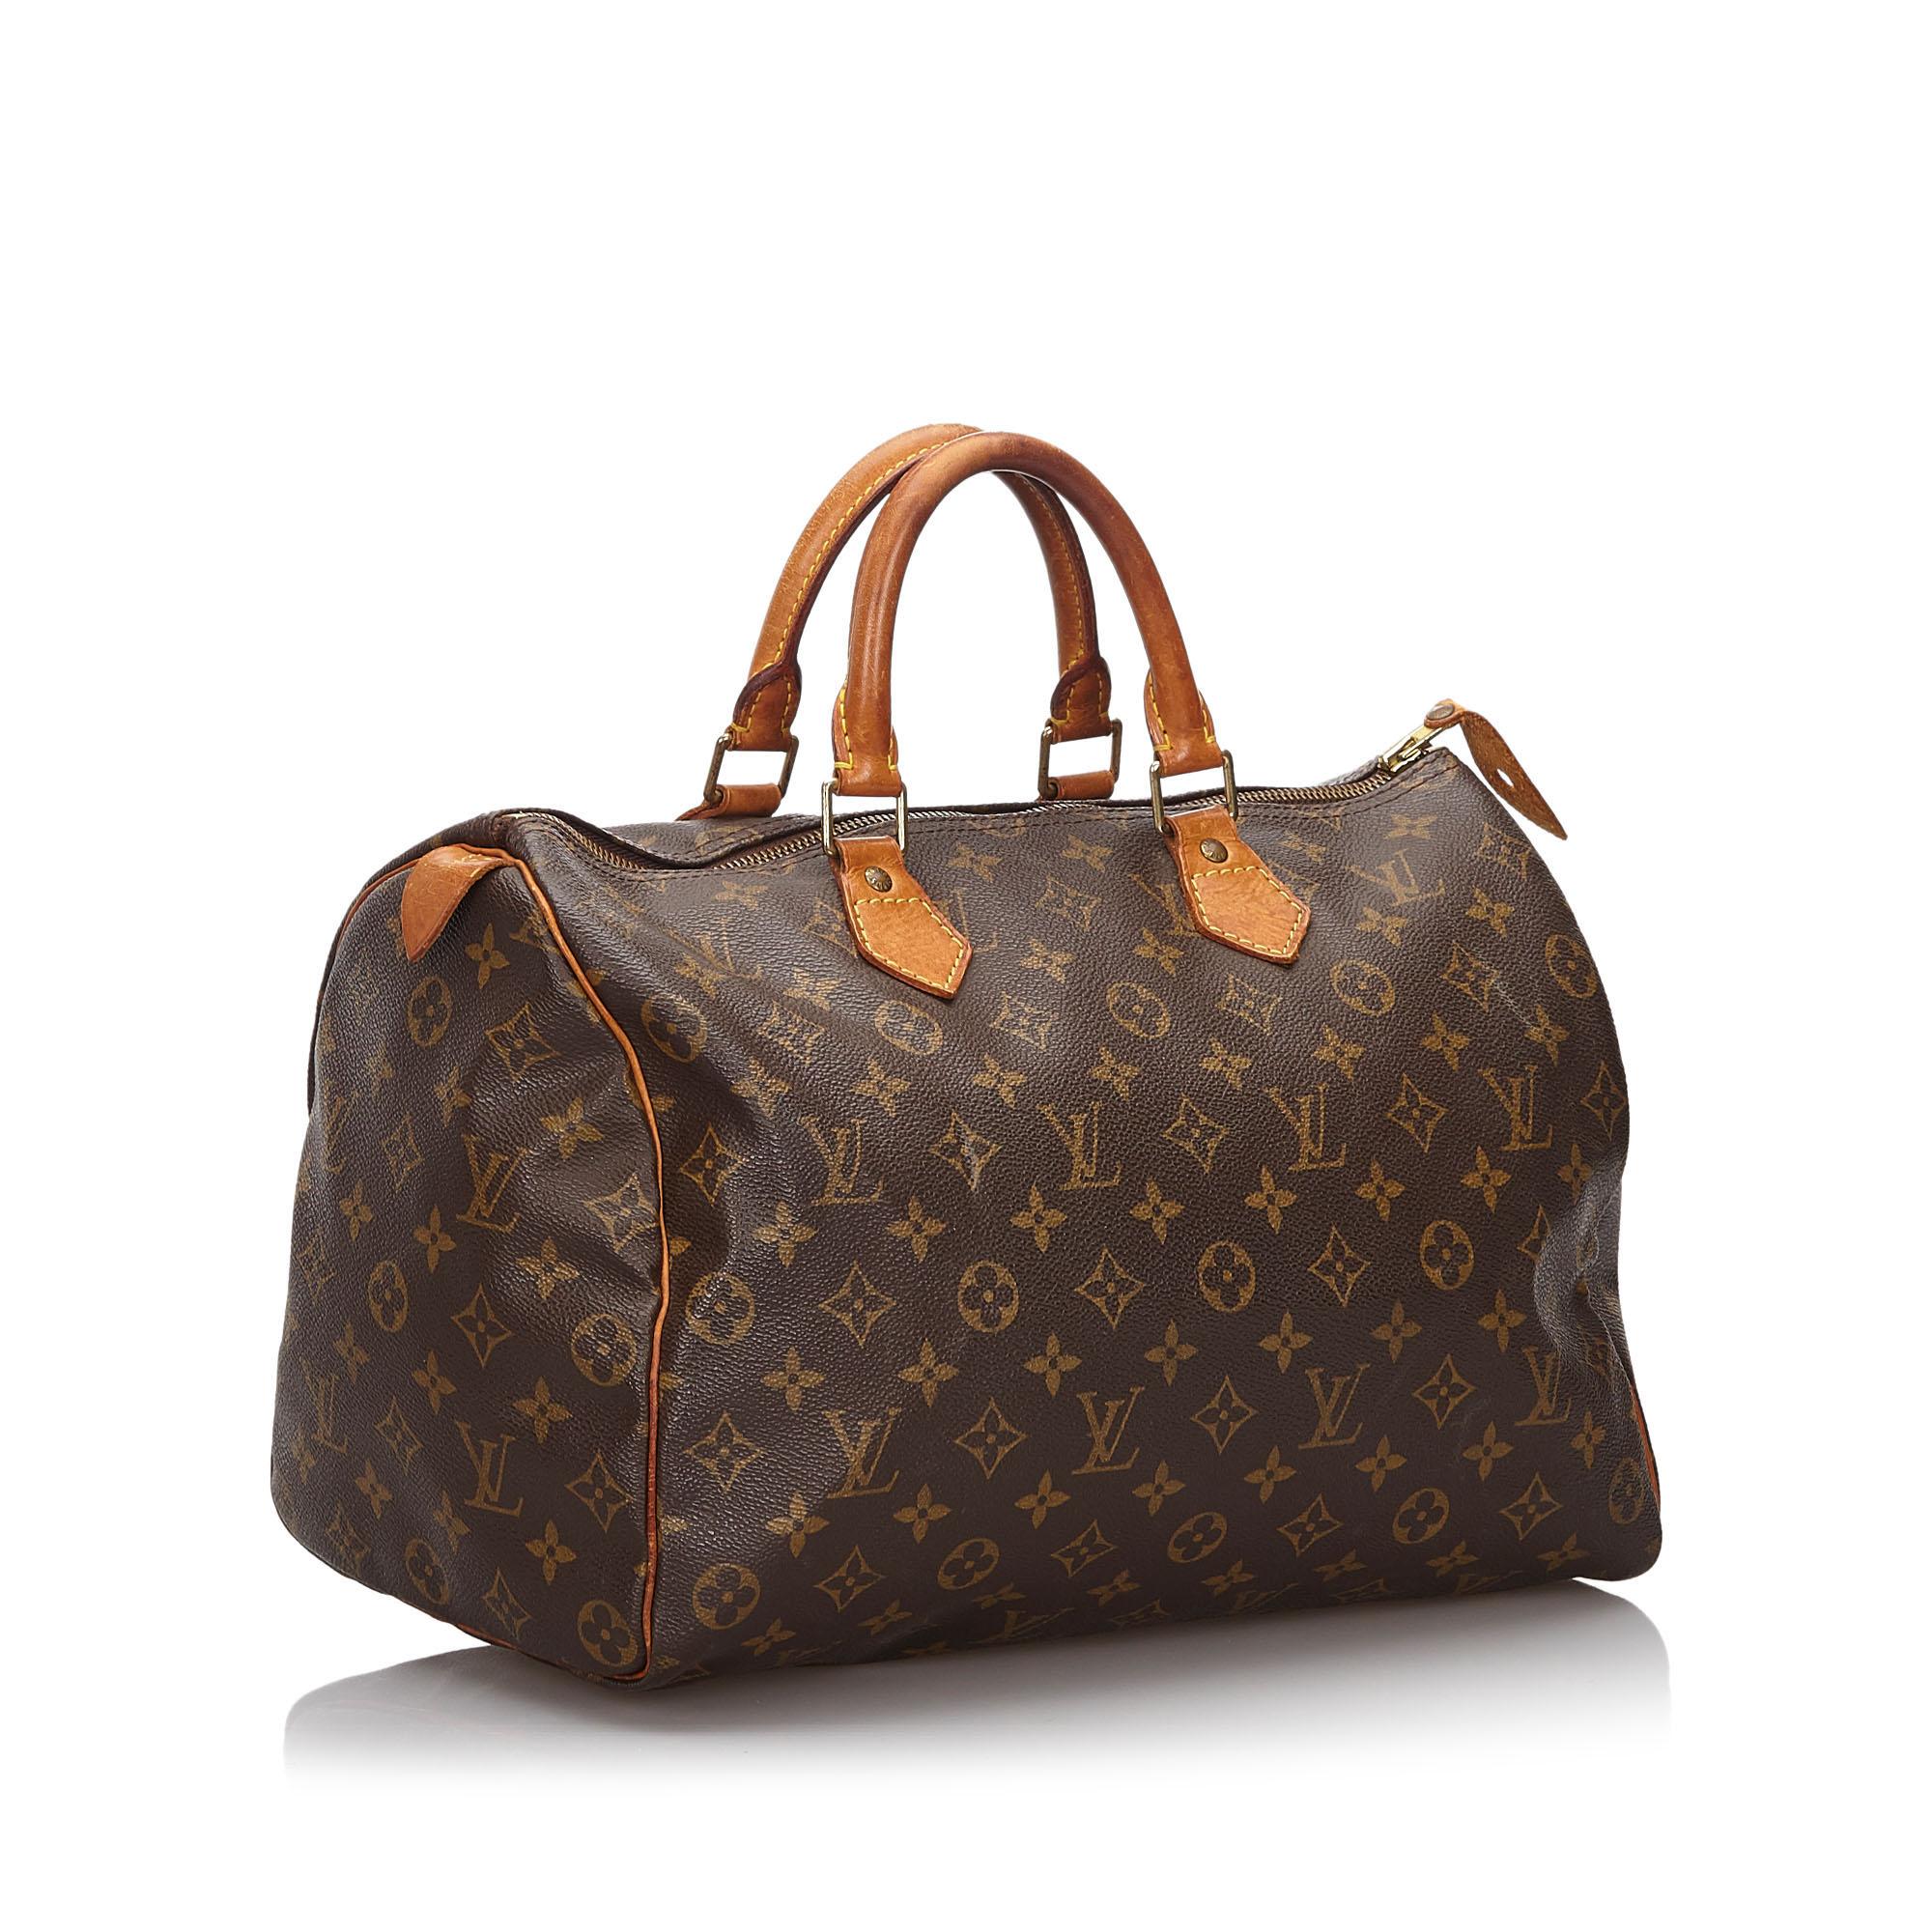 The Speedy 35 features the Monogram canvas, vachetta handles and trim, a top zip closure, and an interior pocket. It carries as B+ condition rating.

Inclusions: 
Padlock

Louis Vuitton pieces do not come with an authenticity card please refer to